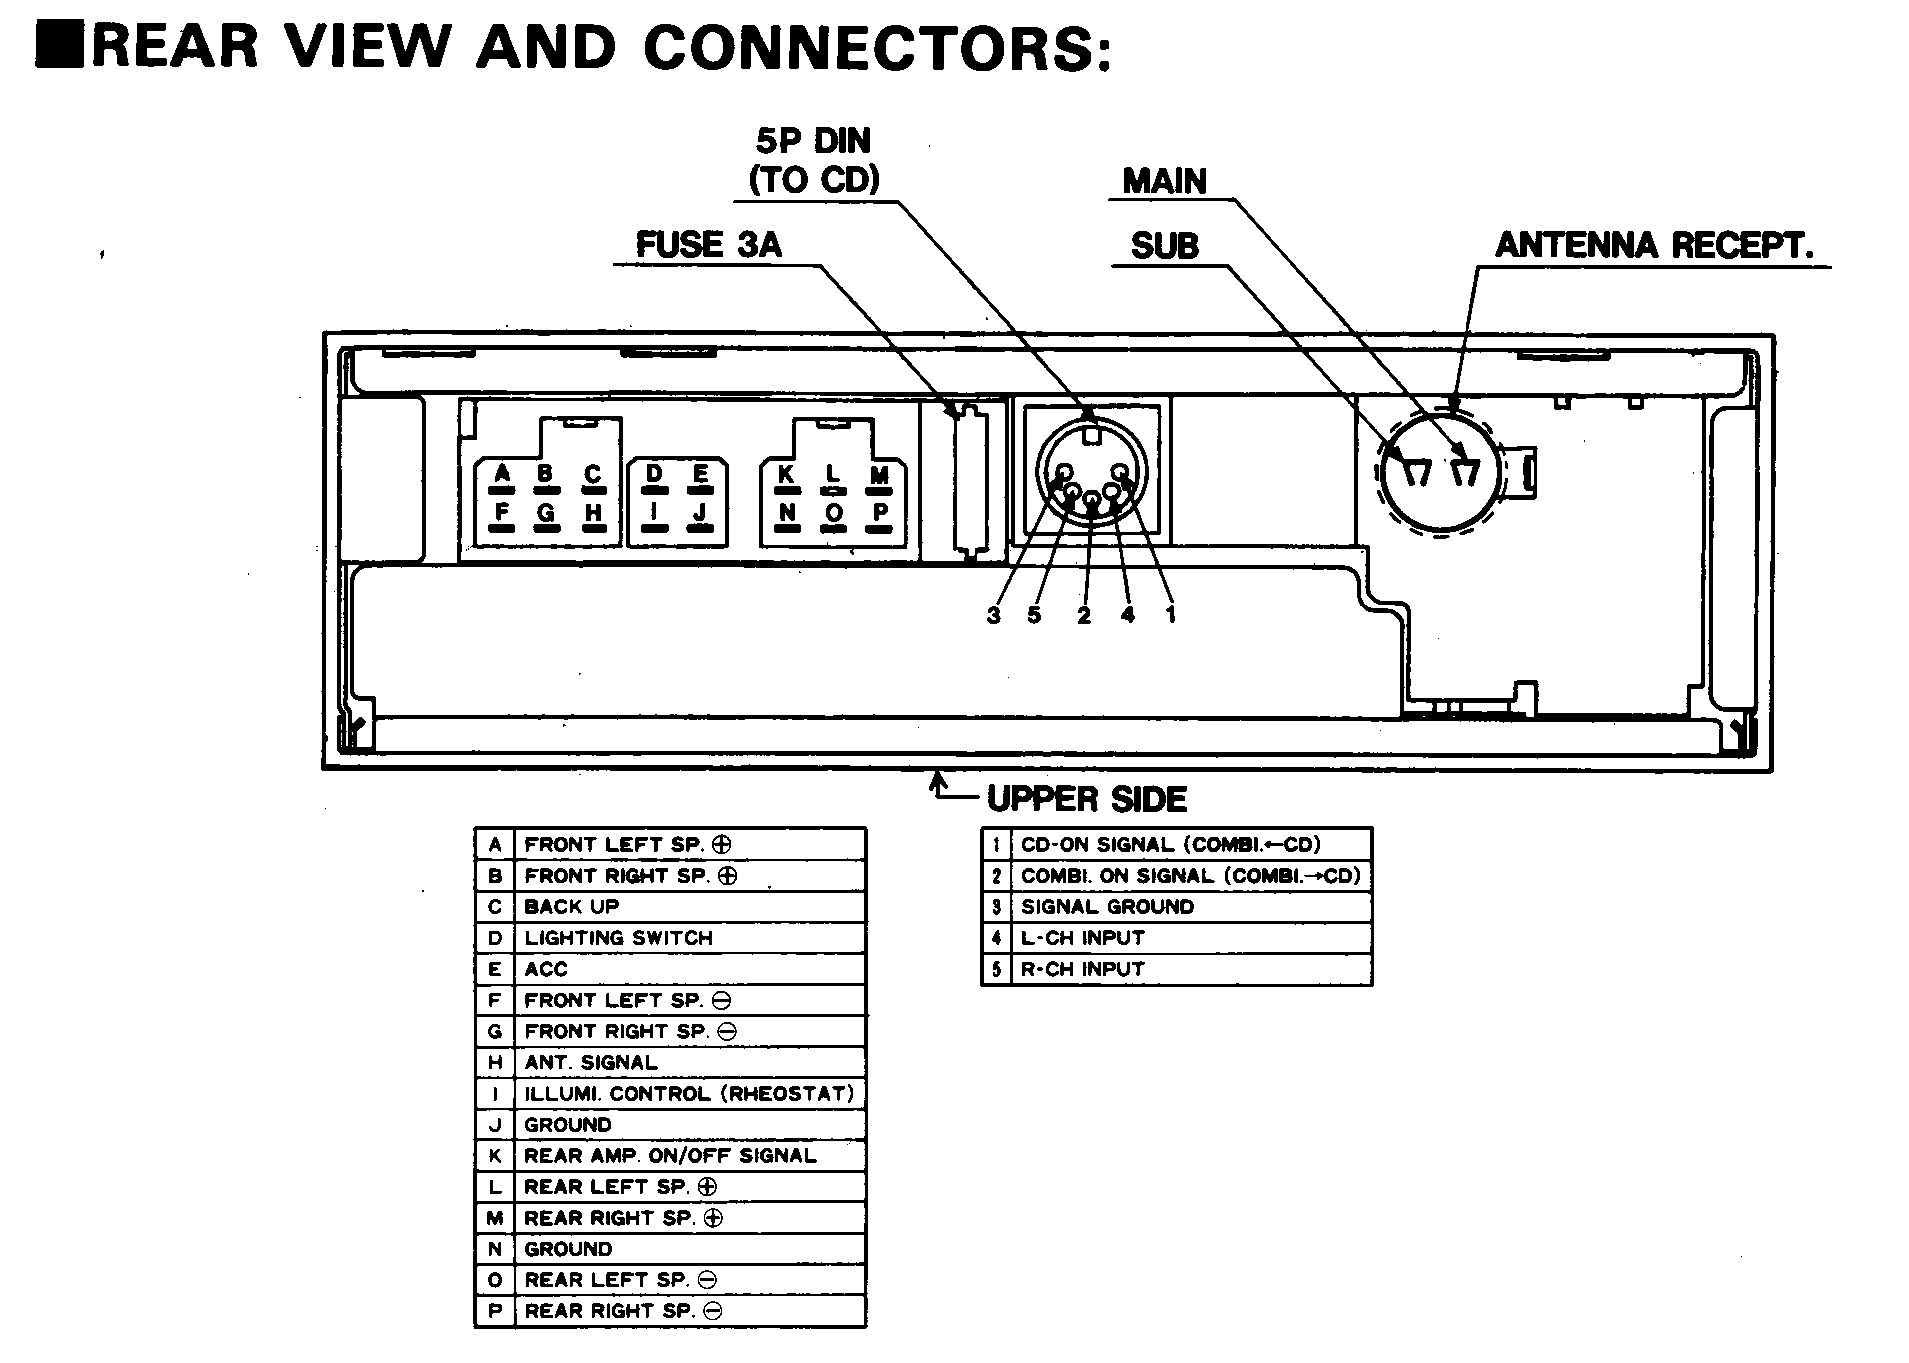 Clarion Car Stereo Wiring Diagram Deck Wiring Diagram Wiring Diagram Of Clarion Car Stereo Wiring Diagram